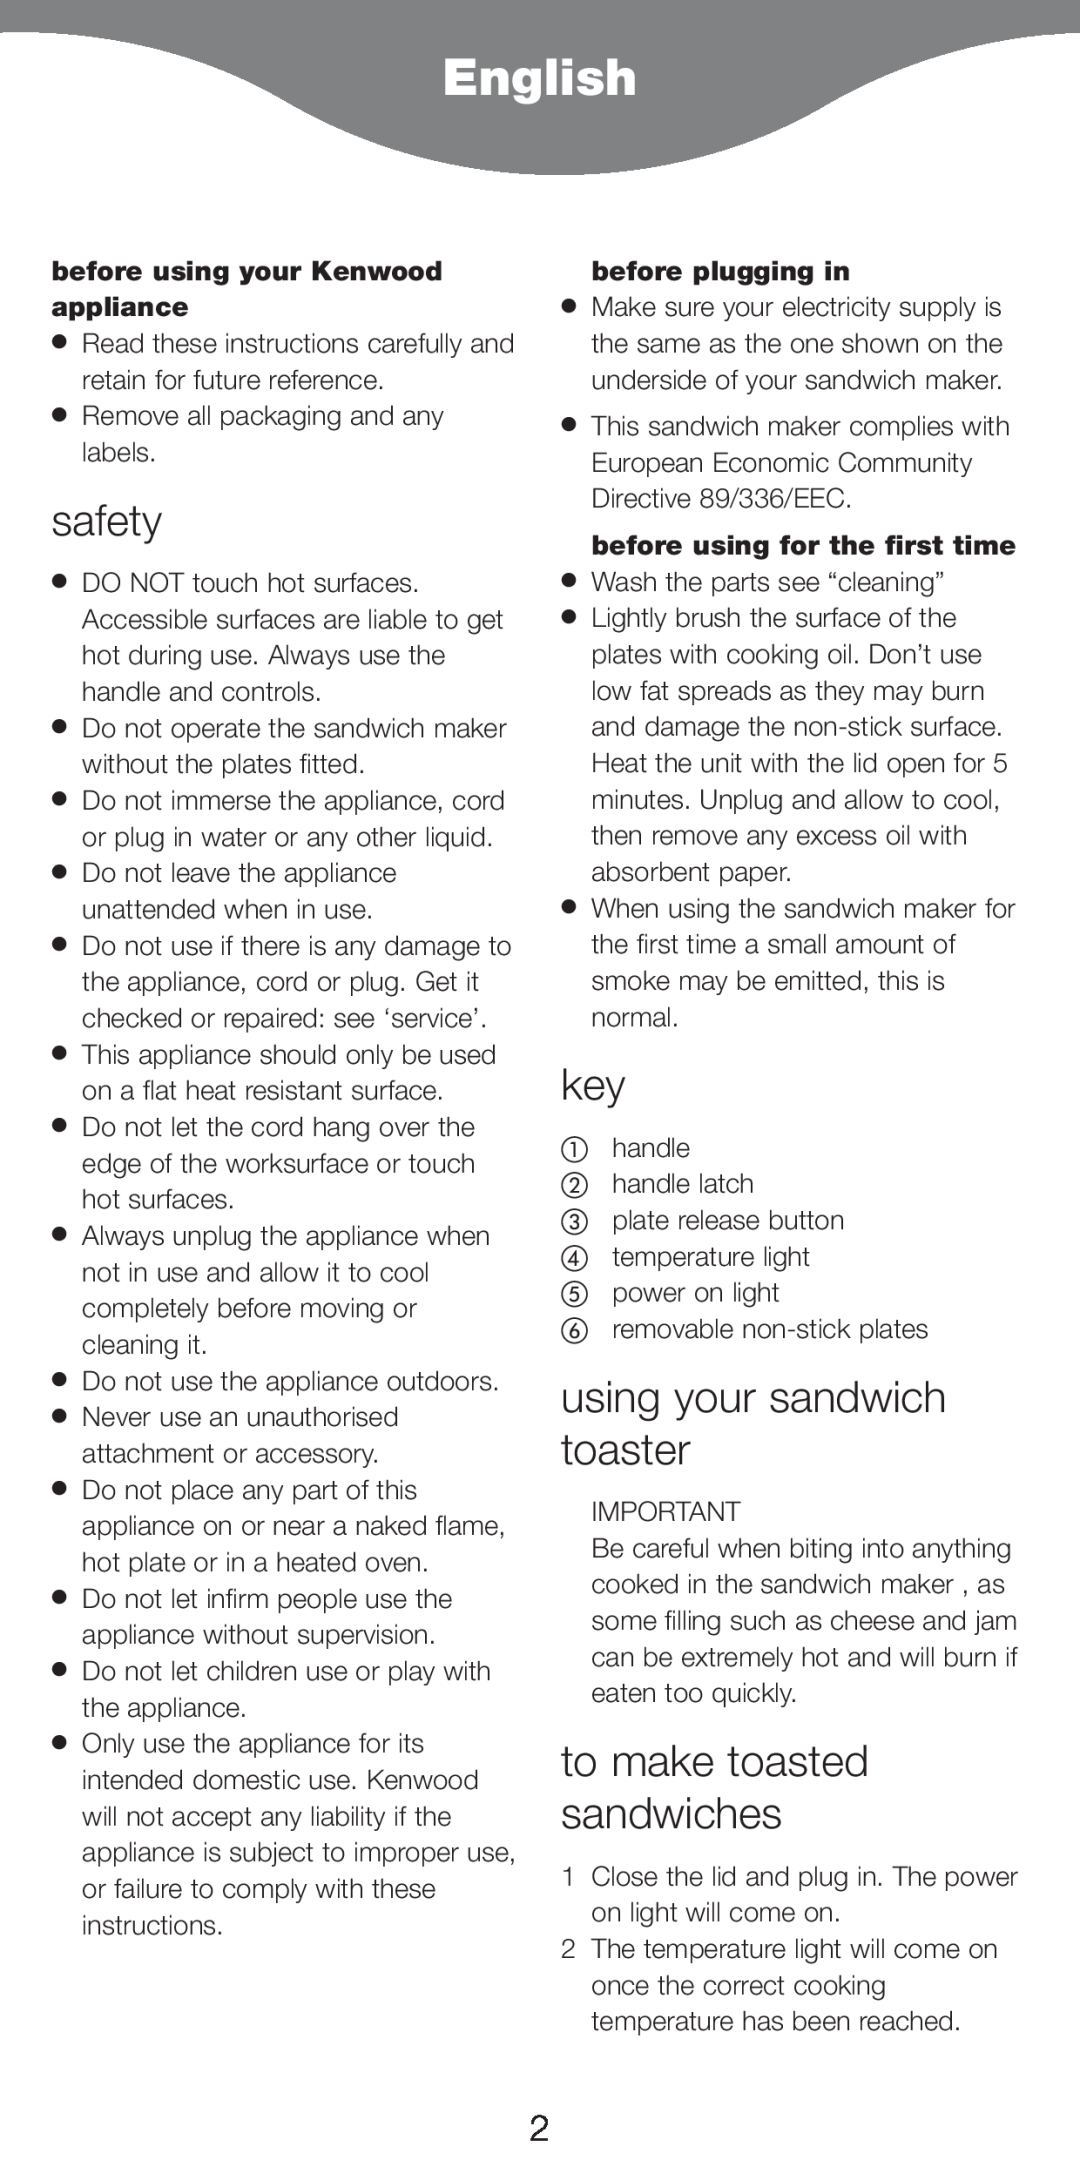 Kenwood SM420 manual English, safety, using your sandwich toaster, to make toasted sandwiches, before plugging in 